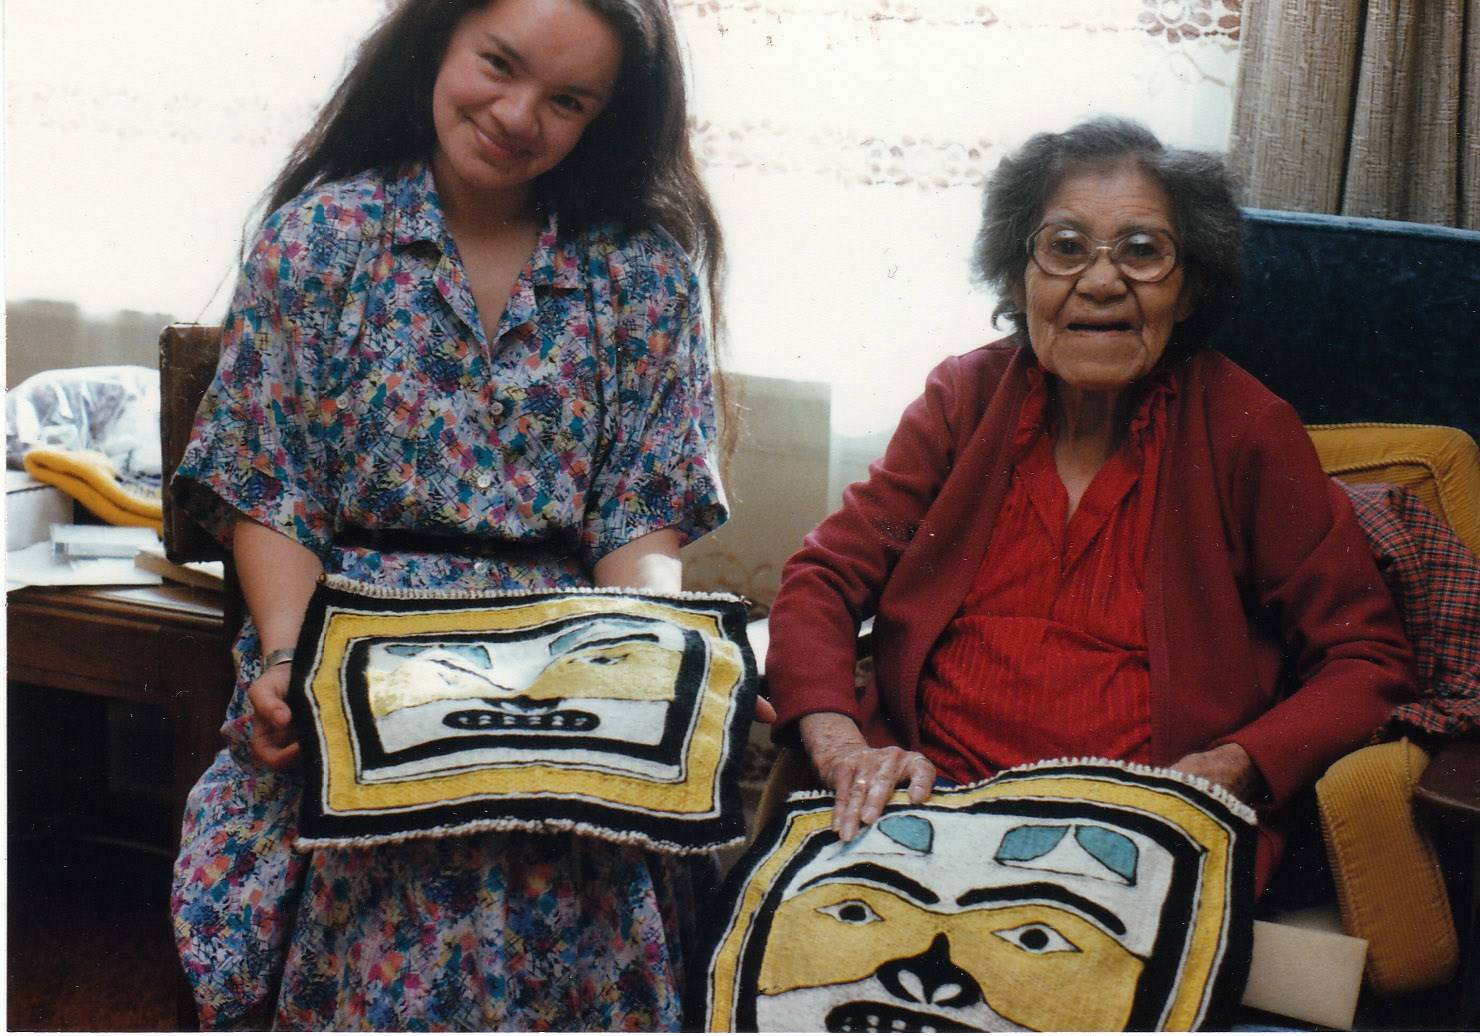 Master weaver Clarissa Rizal, who passed away in 2016, with her teacher, master weaver Jennie Thlunaut, in 1986. Image courtesy of the JAHC.